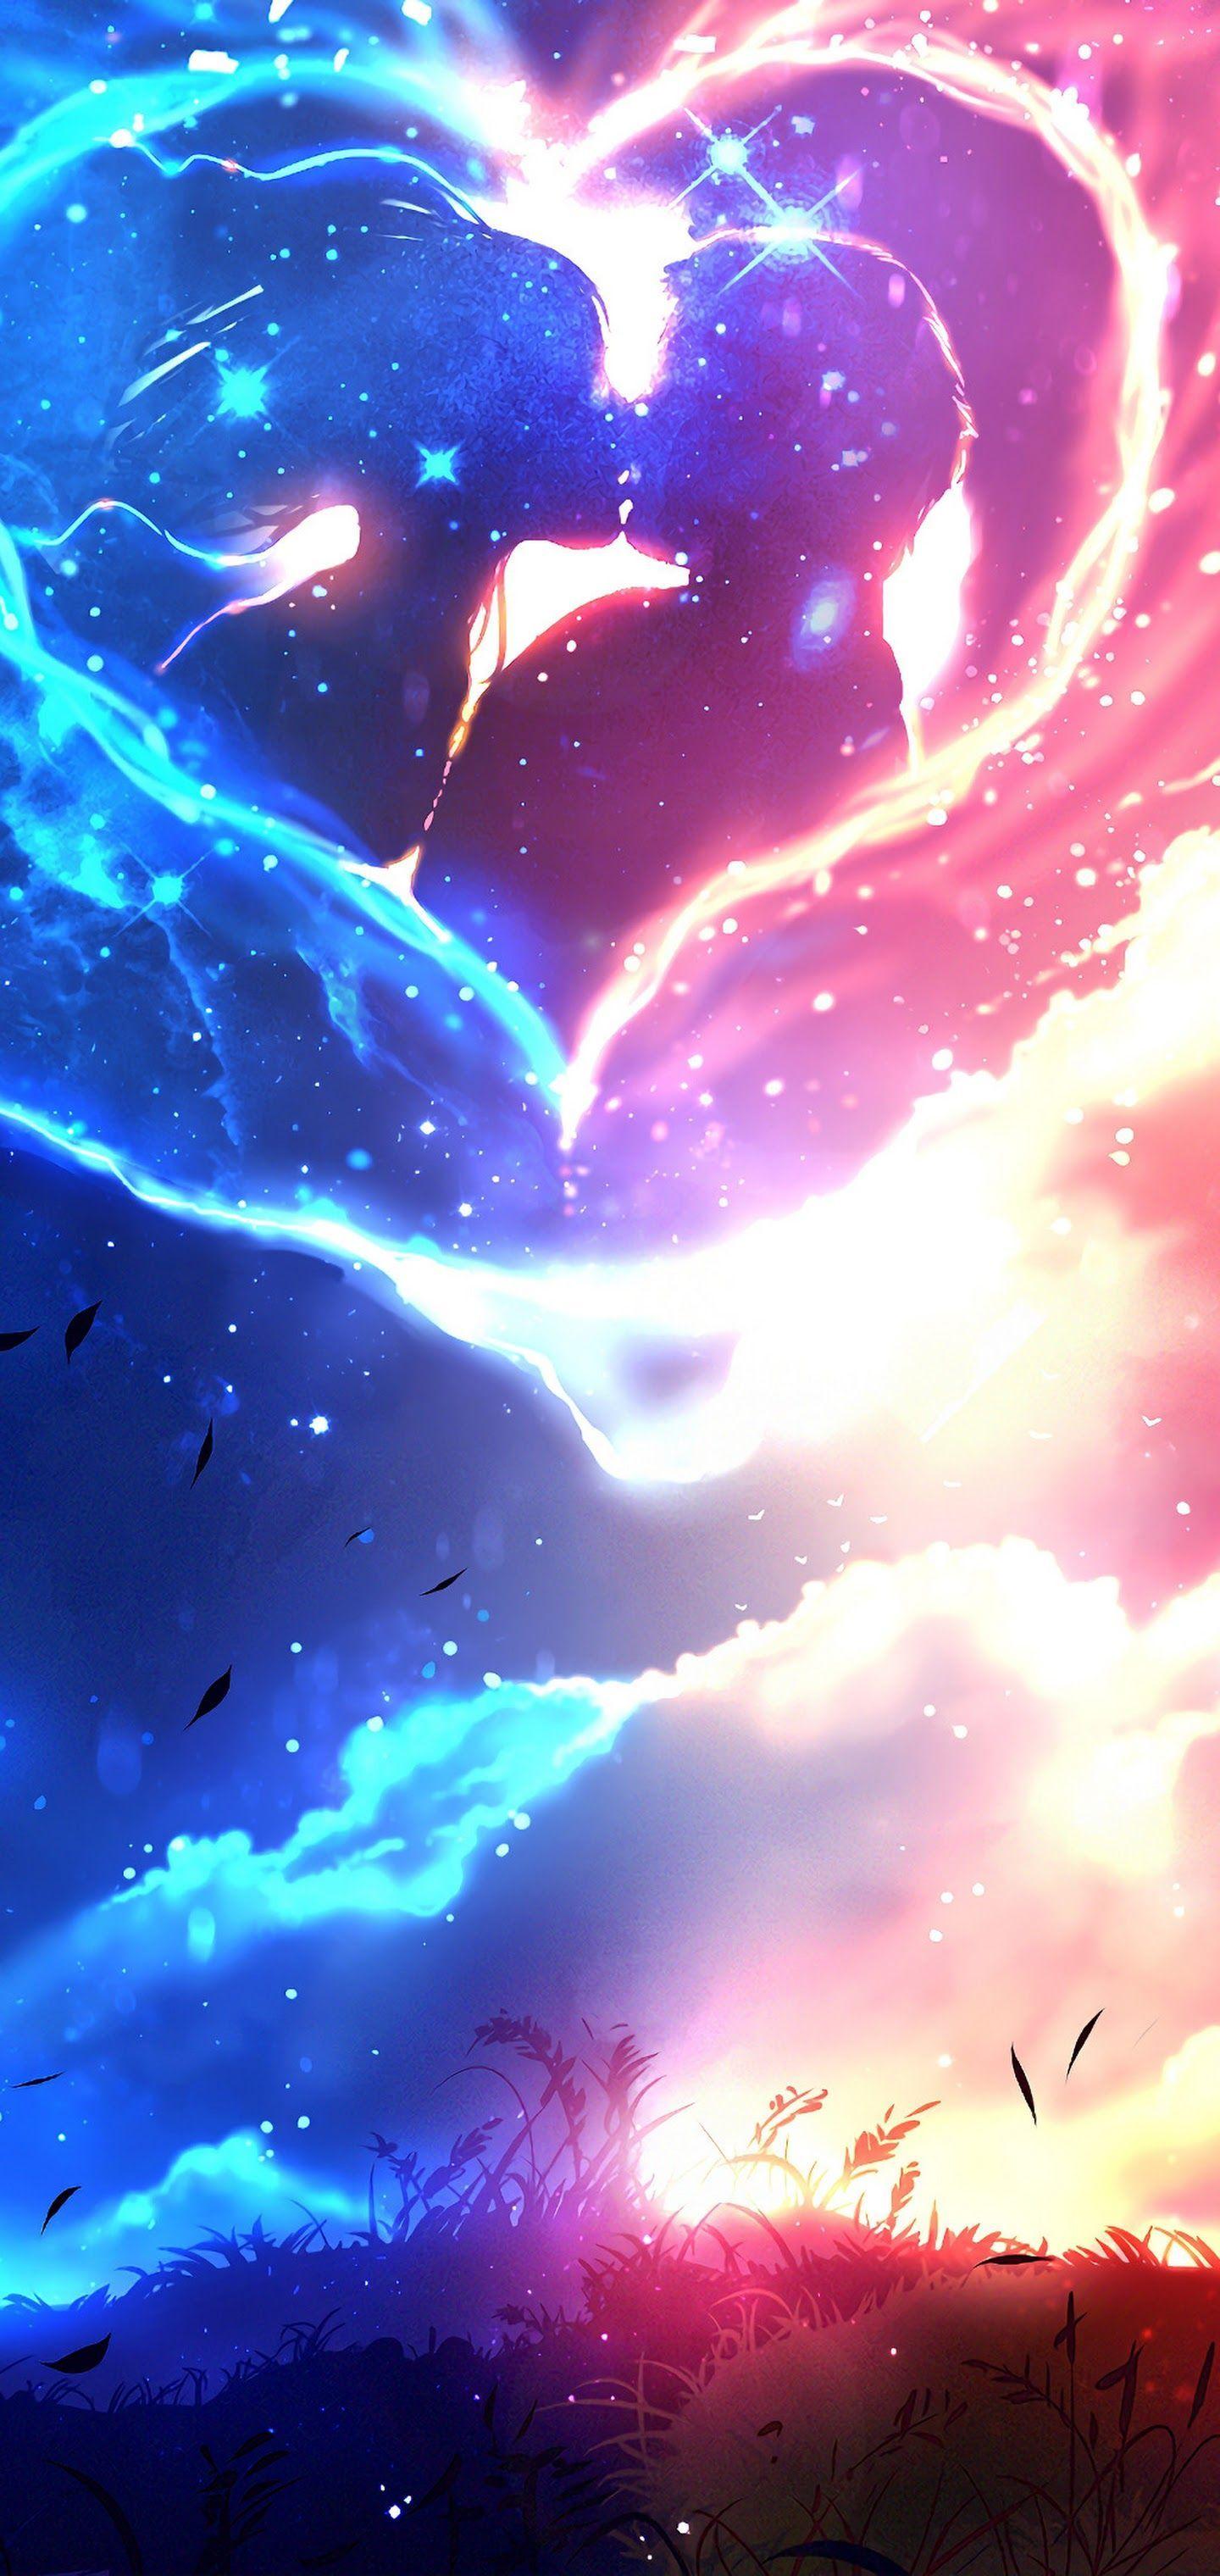 Galaxy Anime 4k Wallpapers Top Free Galaxy Anime 4k Backgrounds